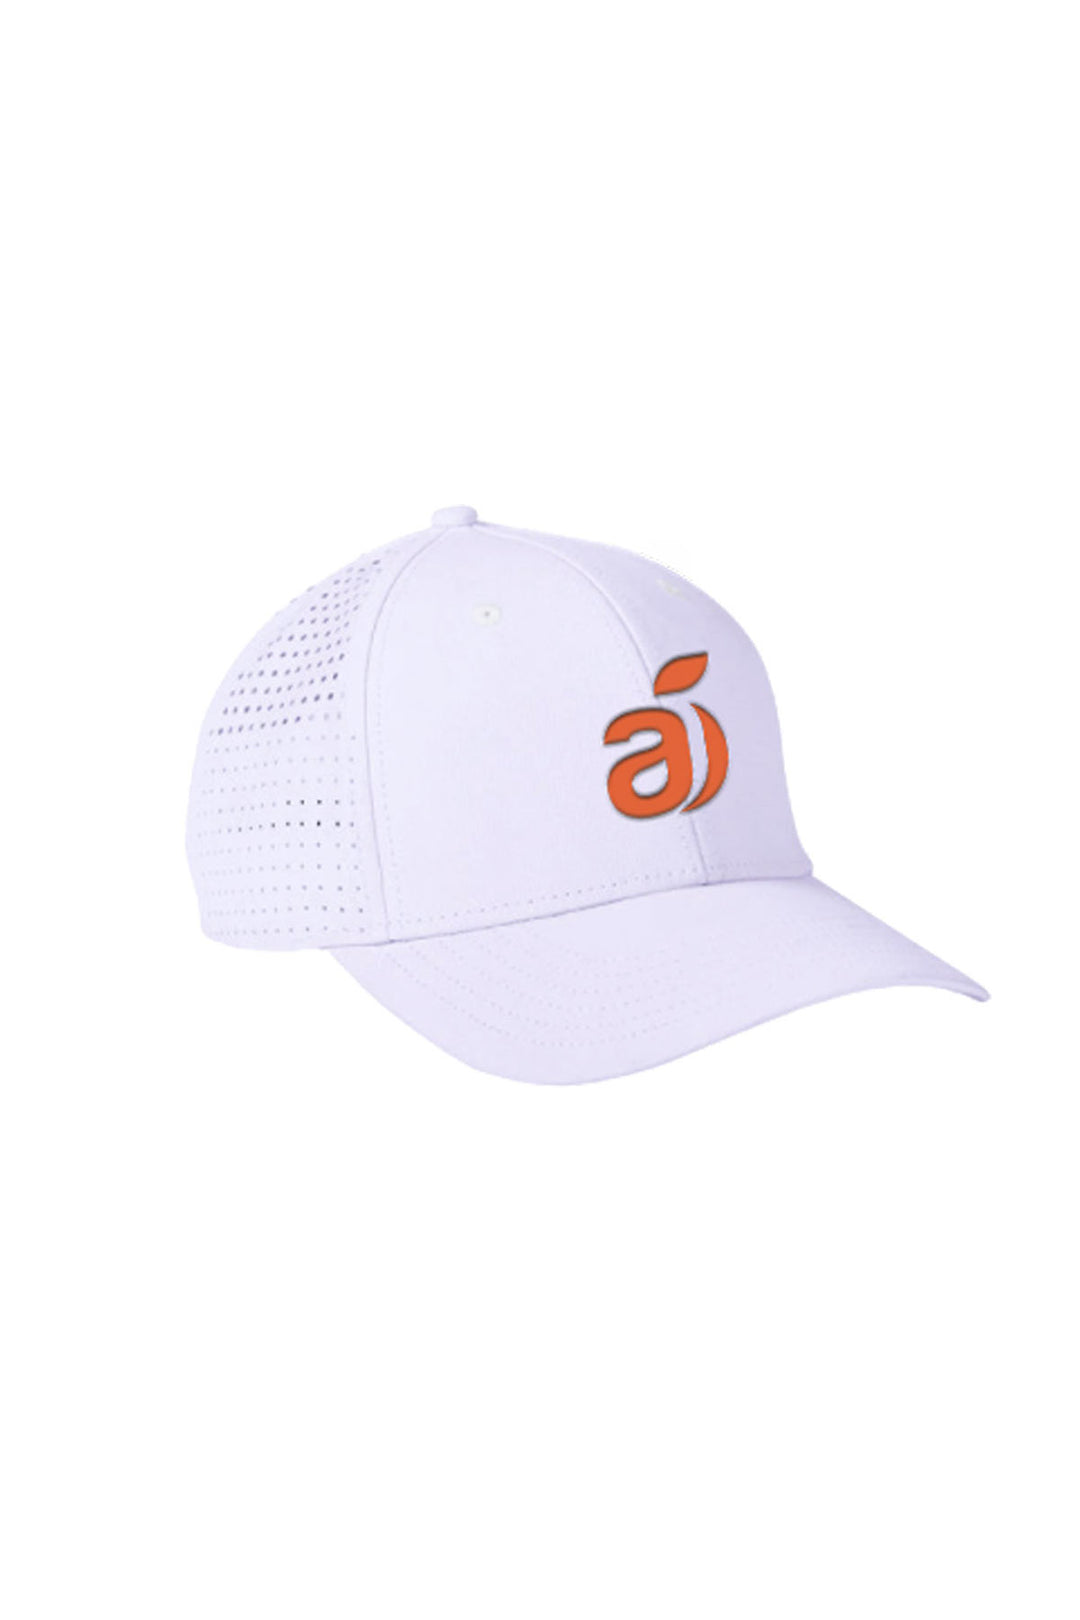 Performance Perforated Cap - 3D Puff